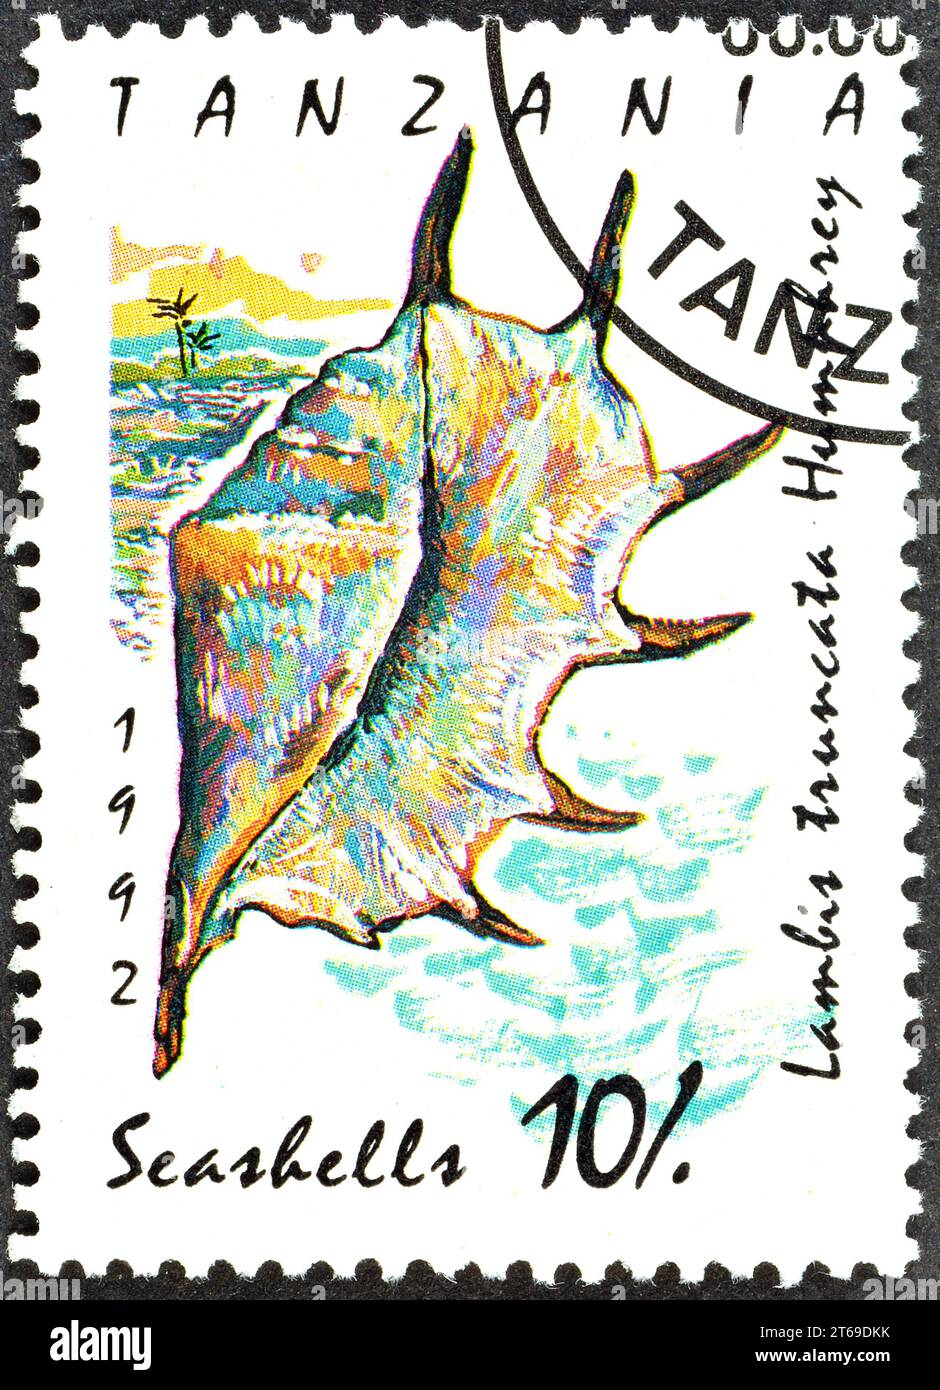 Cancelled postage stamp printed by Tanzania, that shows Giant Spider Conch (Lambis truncata), circa 1992. Stock Photo